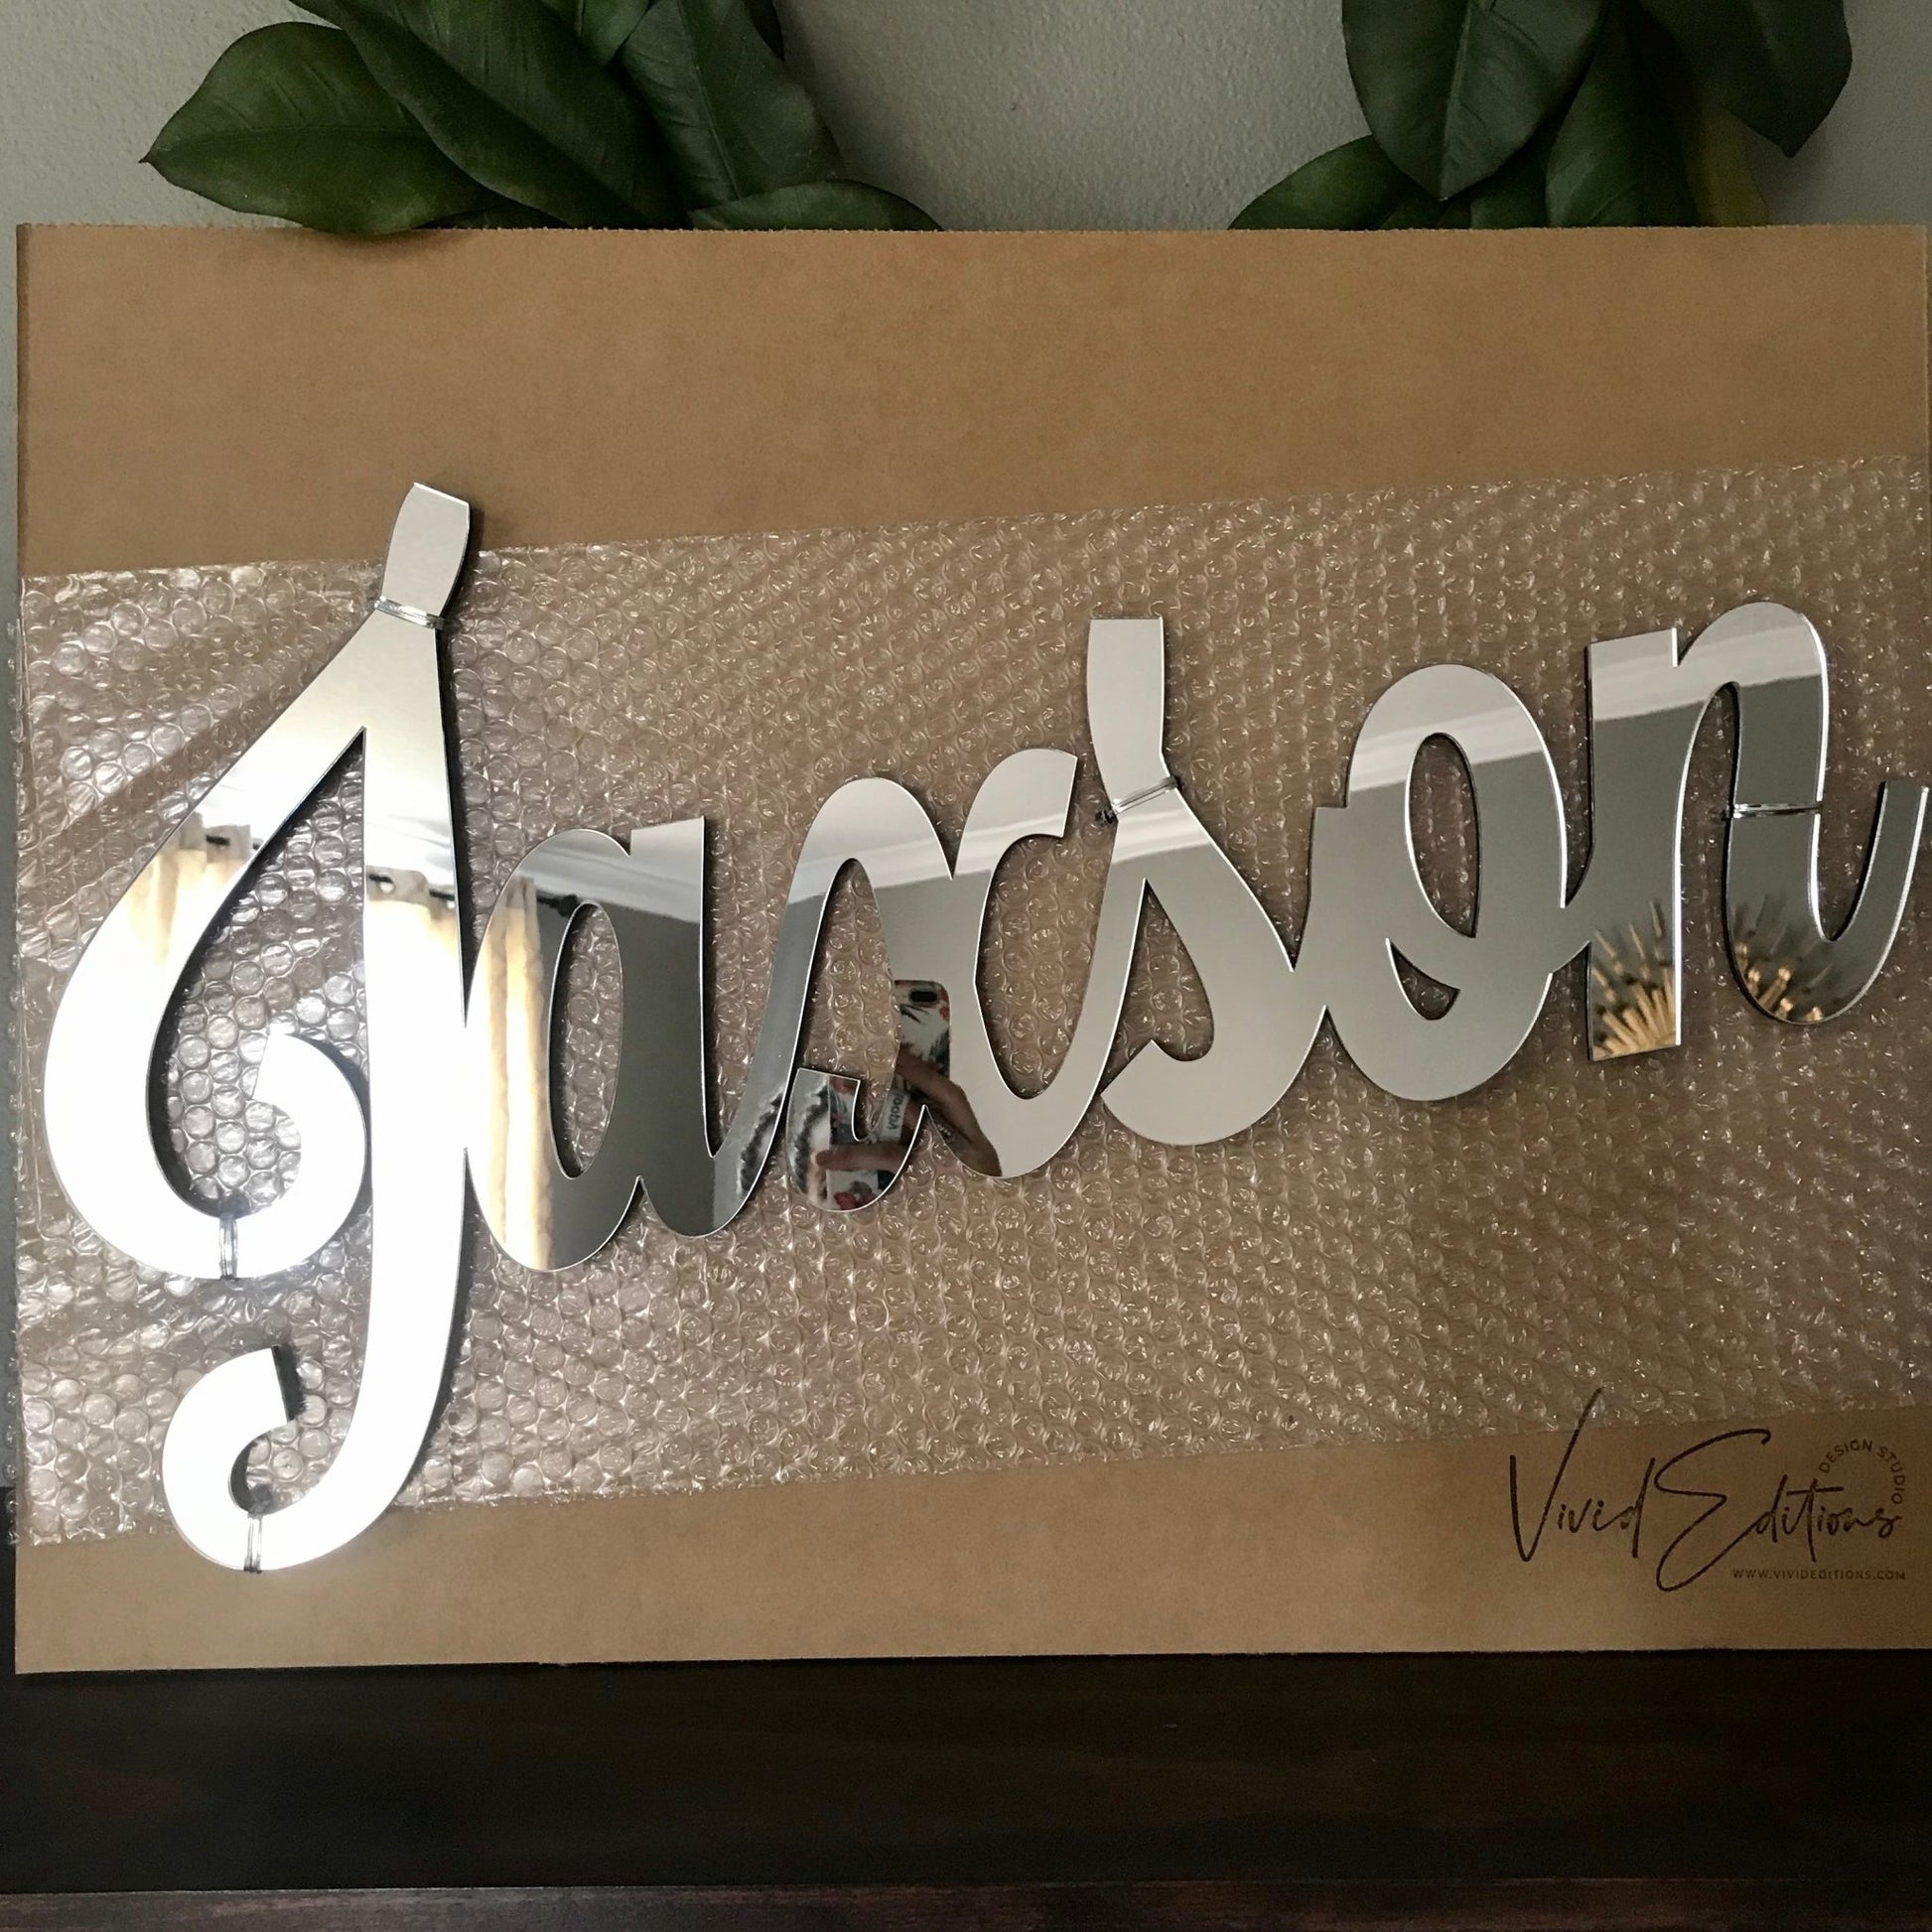 24” Silver Mirror Medium Personalized Name Sign - VividEditions